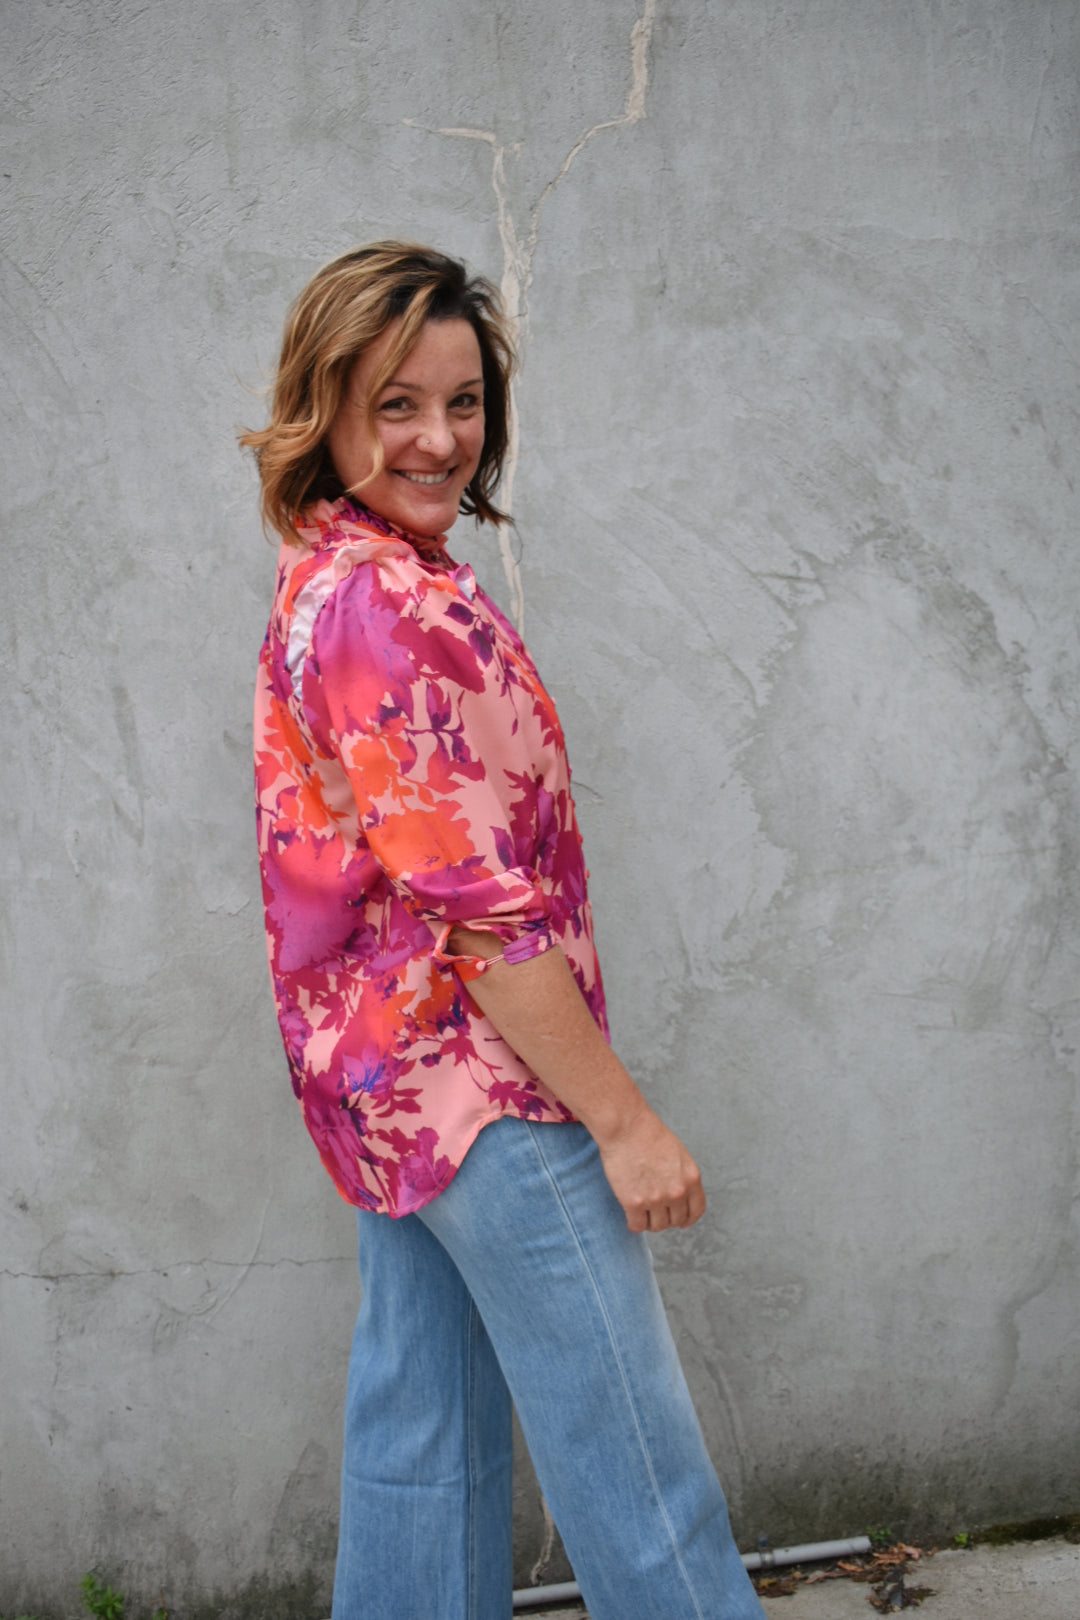 fuchsia, orange, light purple, and blush patterned button down blouse. ruffled V-neckline and ruffled shoulder detailing. Button-cuffed 3/4 sleeves. The brand is First Love.